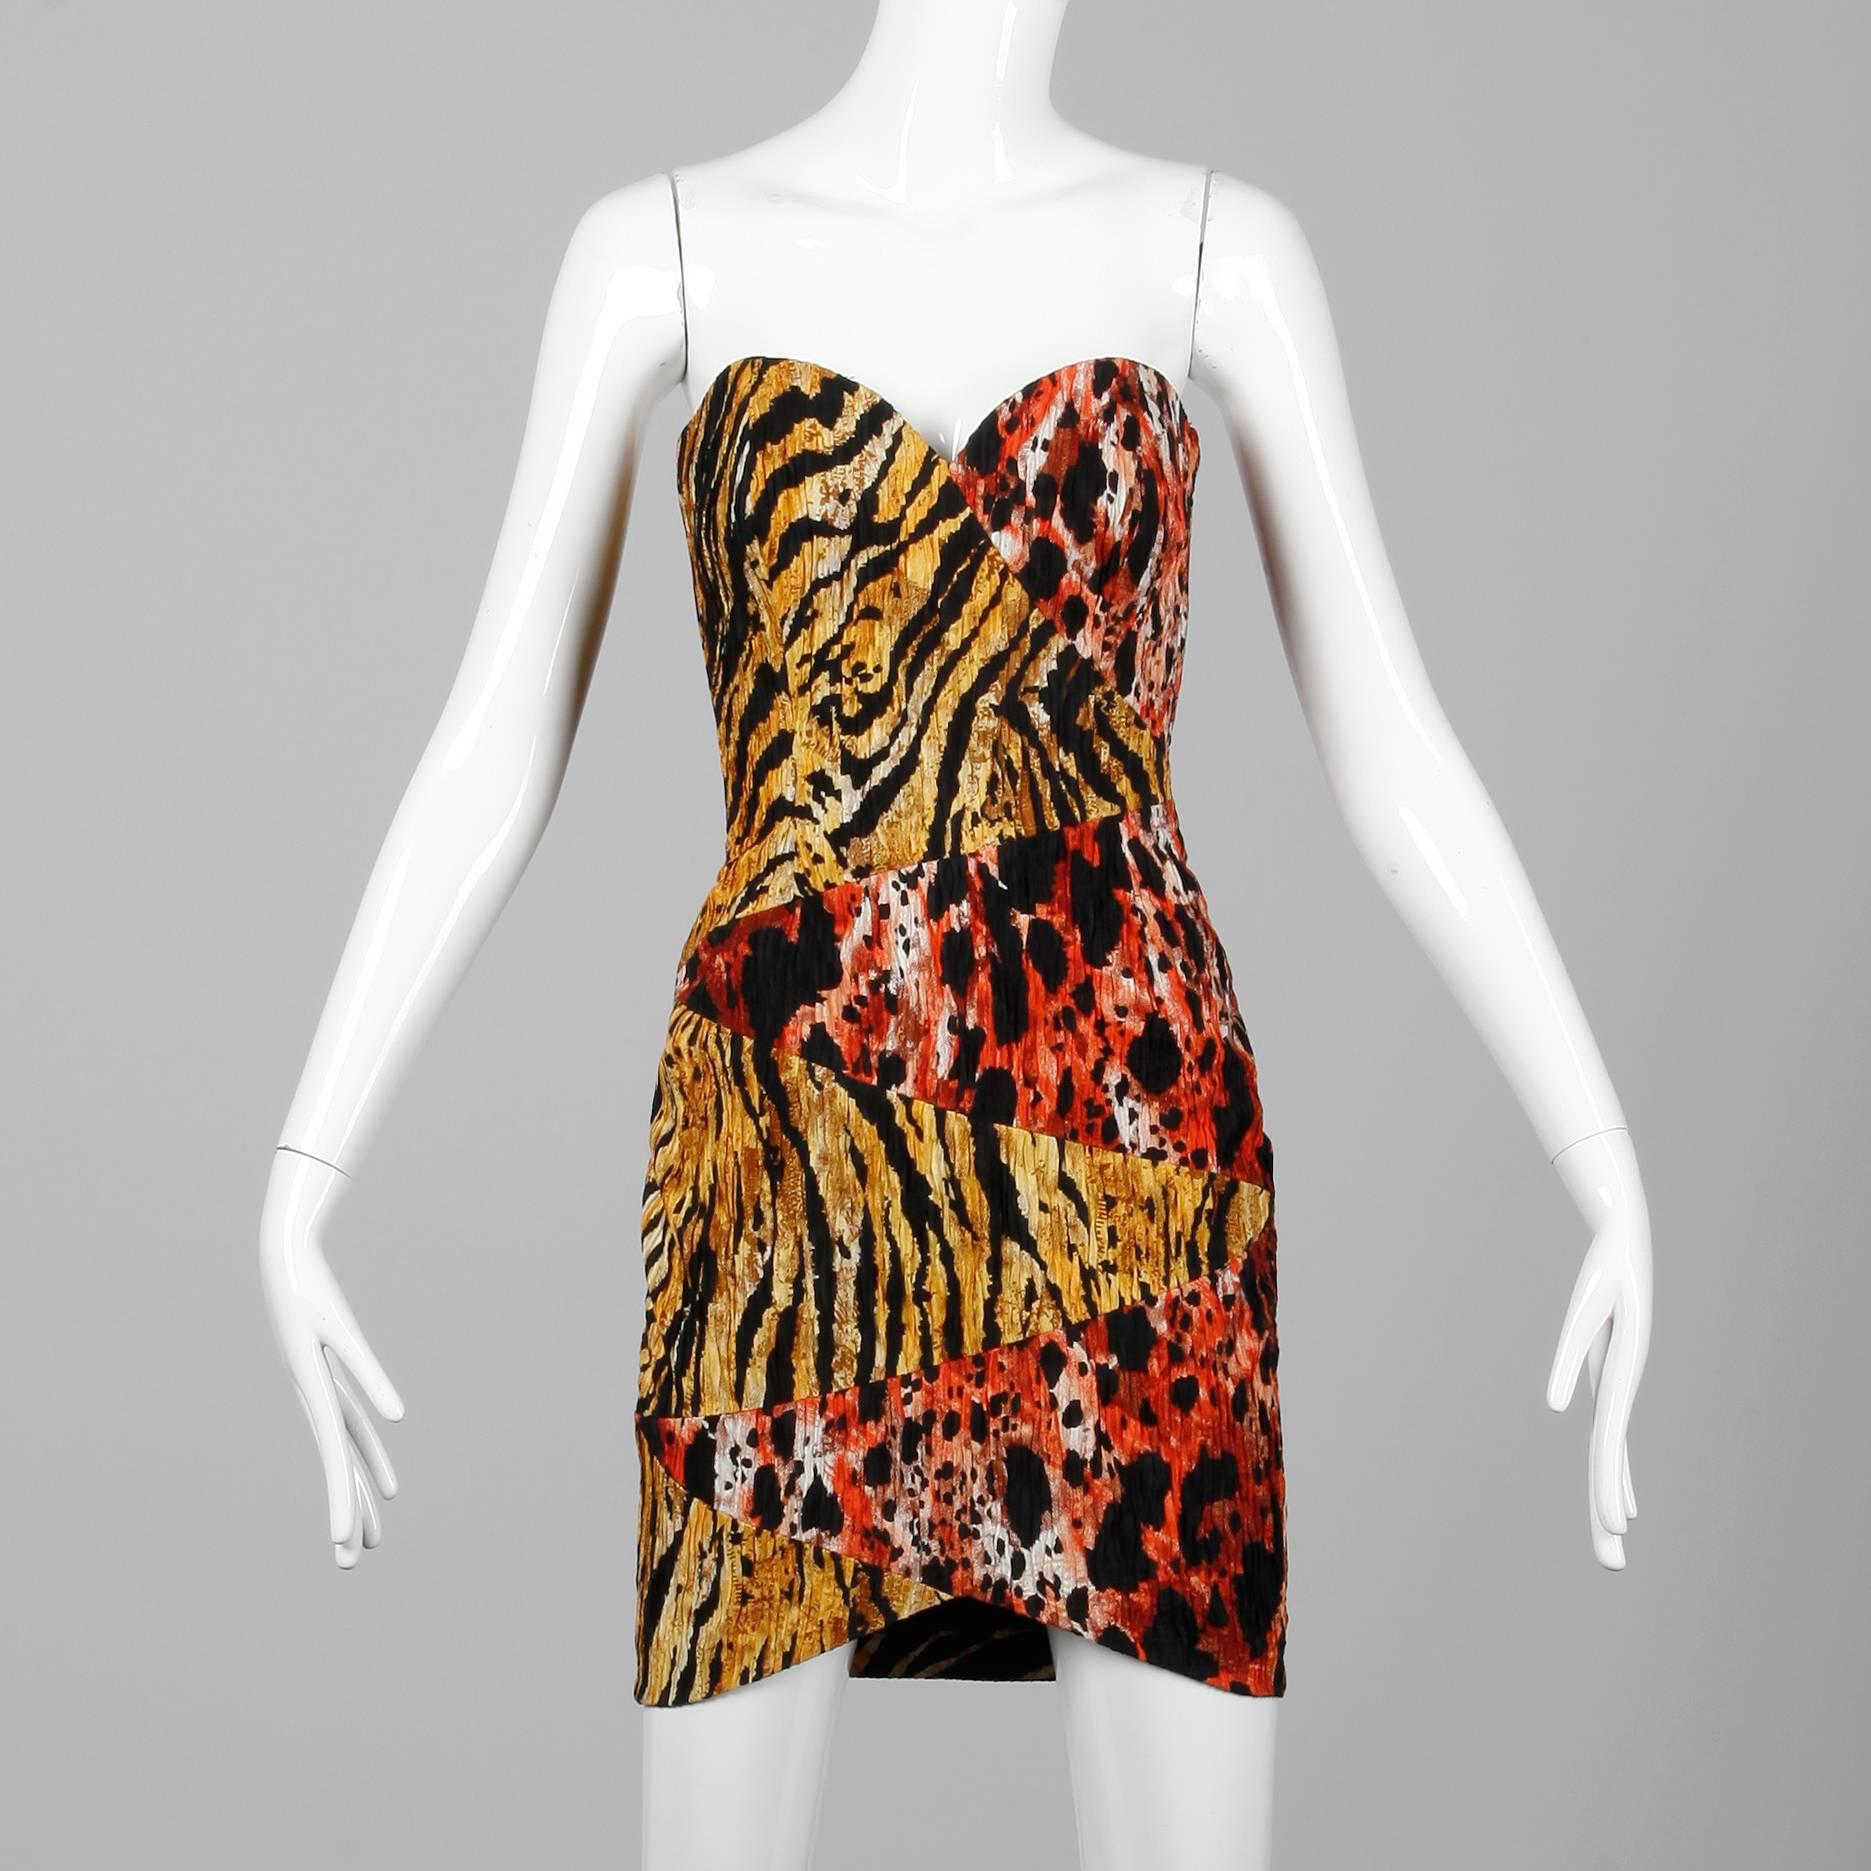 Sexy vintage mini dress in two tone animal prints by Mila Schon. Fully lined with side zip and hook closure. The marked size is 42 and the dress fits like a modern XS. The bust measures 35", waist 24", hips 35", and the total length